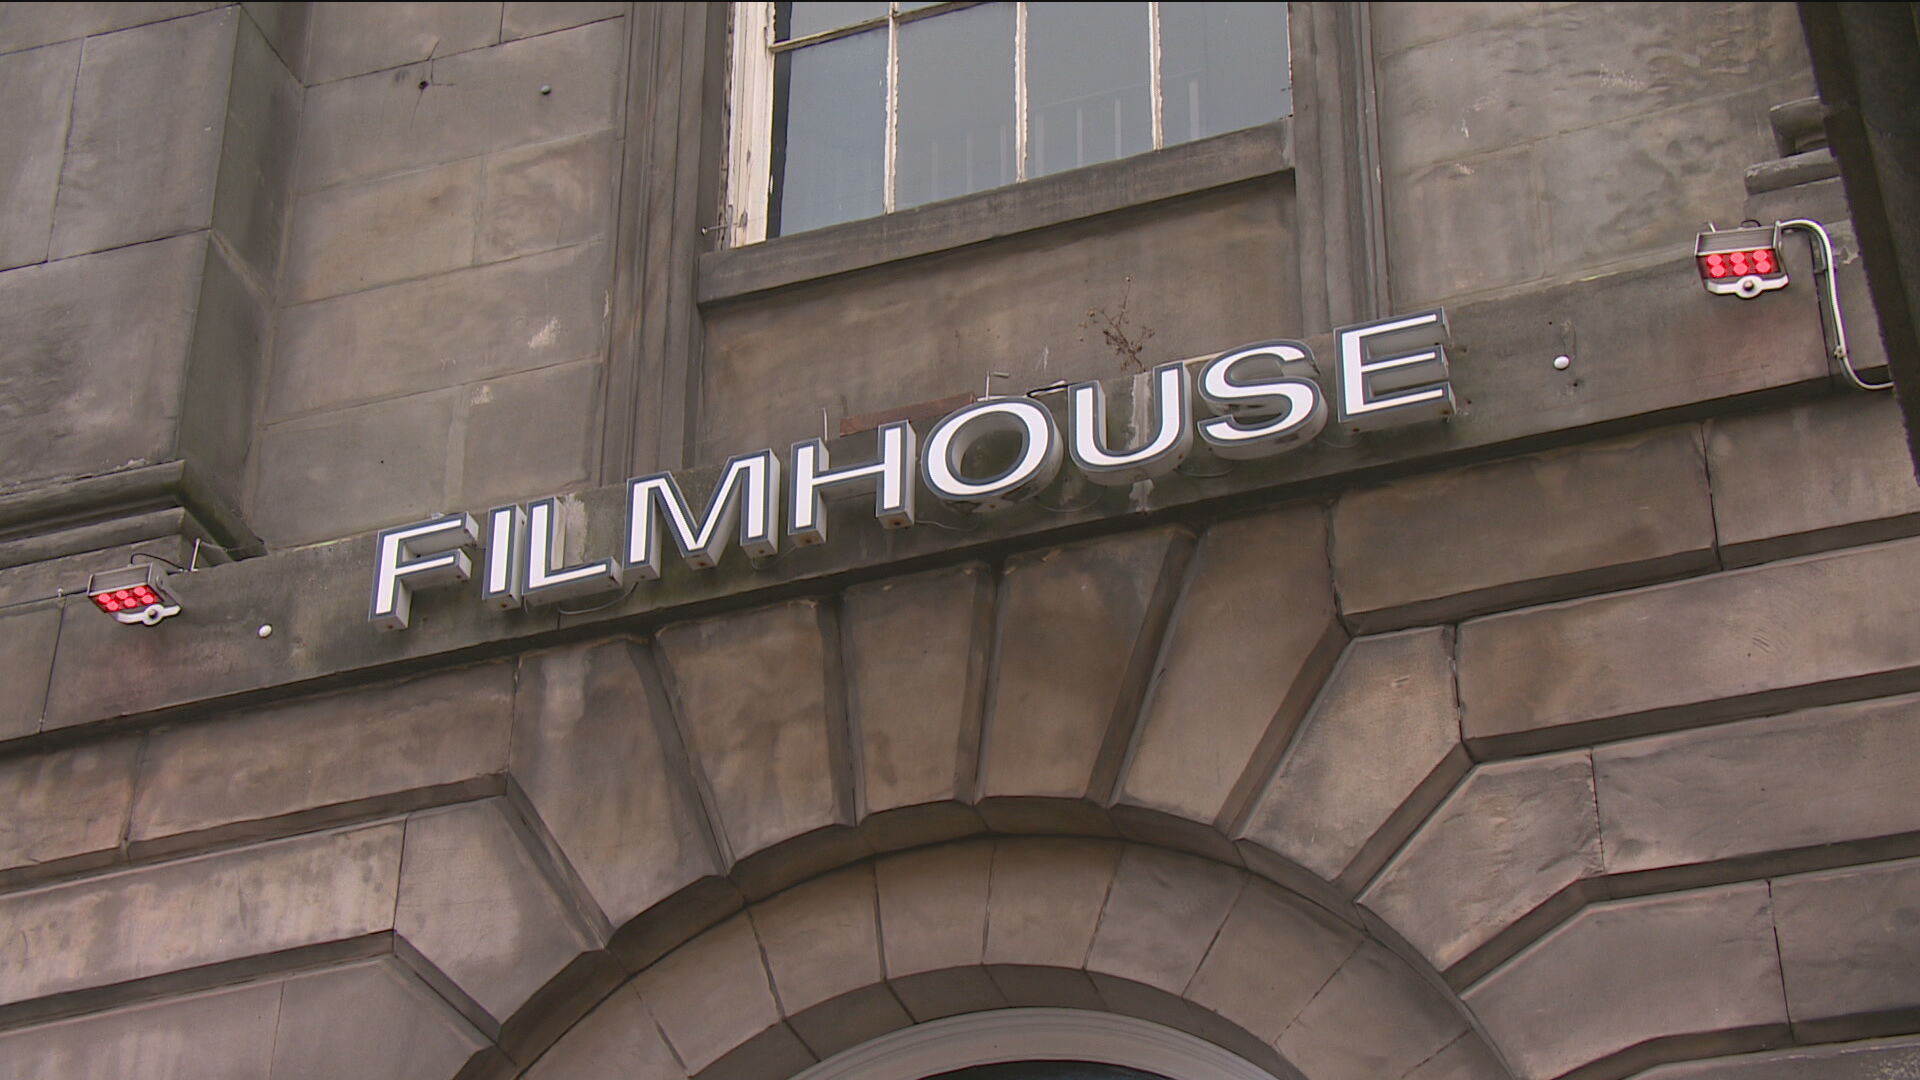 The announcement comes months after the Edinburgh Filmhouse closed, with owners citing the impact of Covid and rising costs.